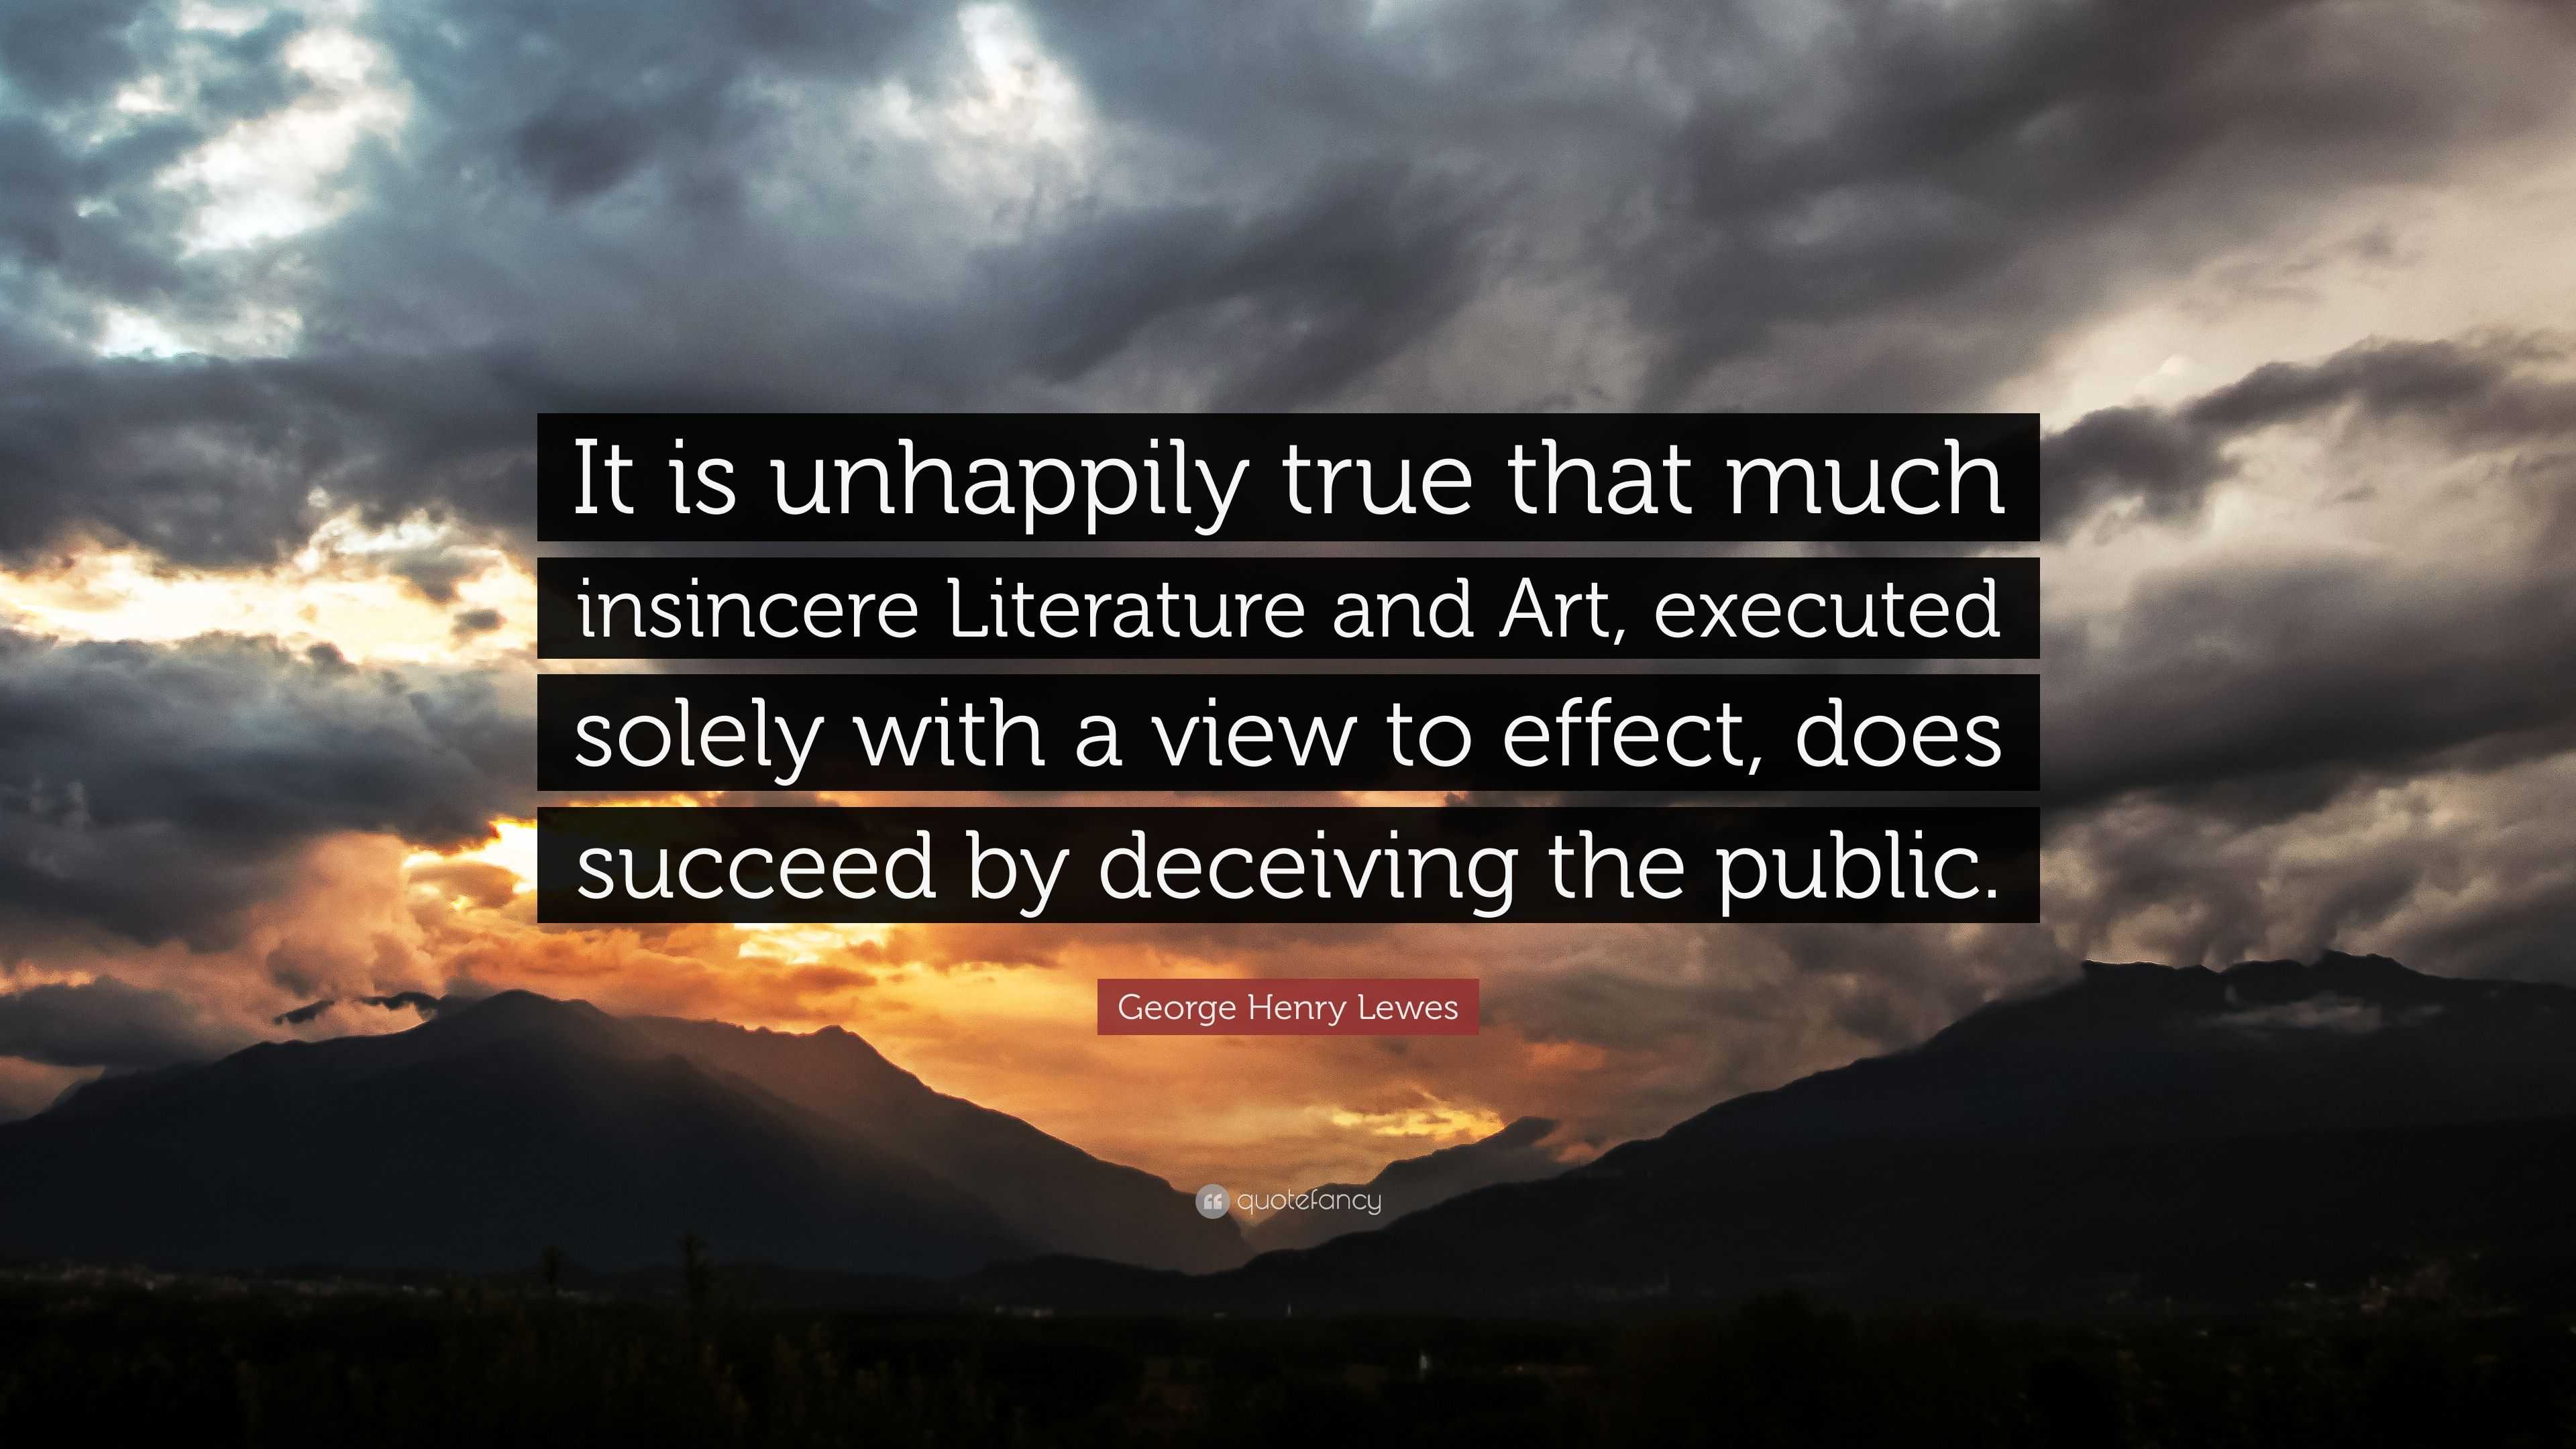 George Henry Lewes Quote: “It is unhappily true that much insincere ...